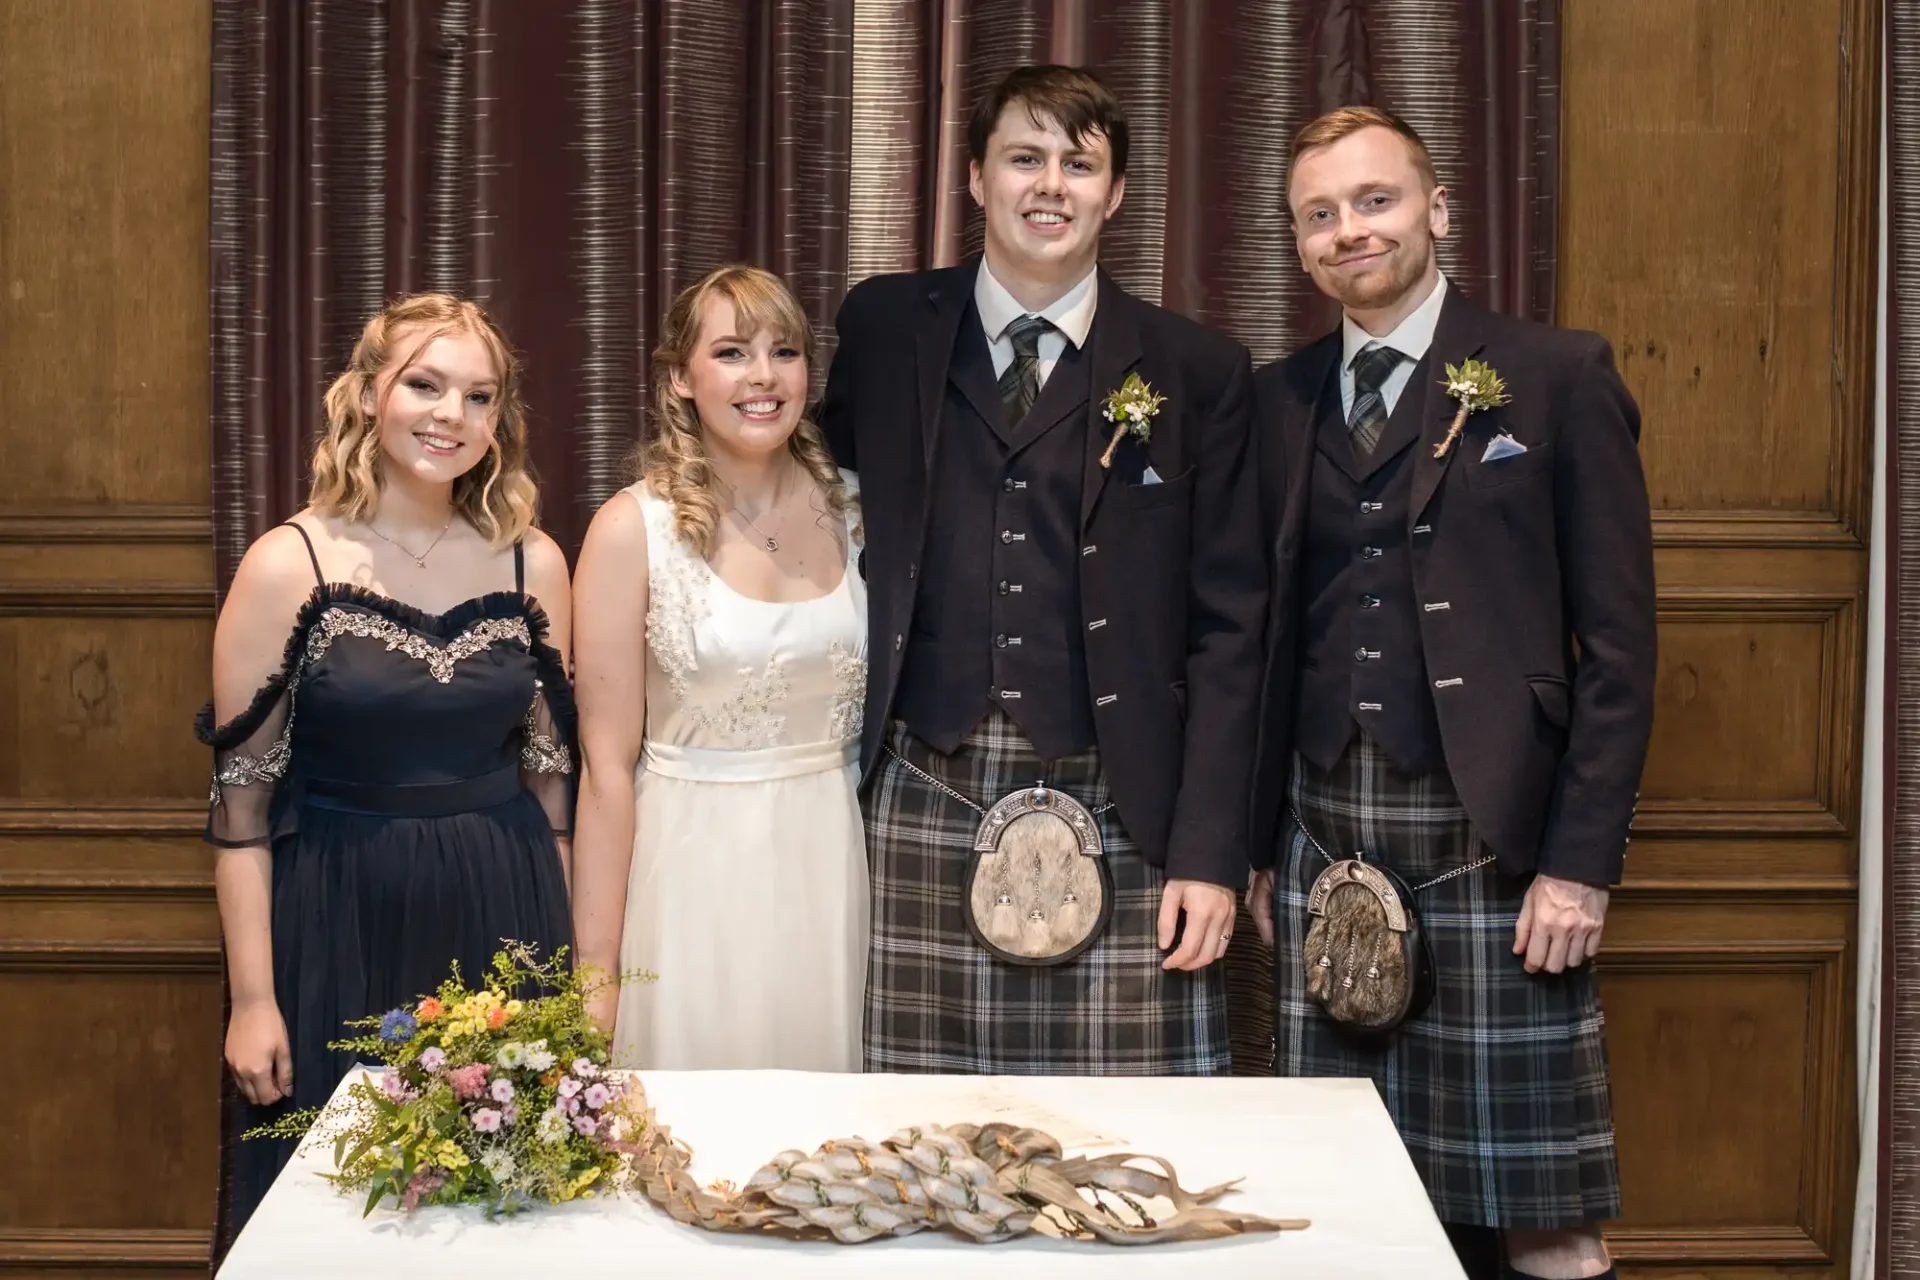 Two women and two men in formal attire, featuring kilts, posing with smiles behind a table adorned with flowers and antlers.